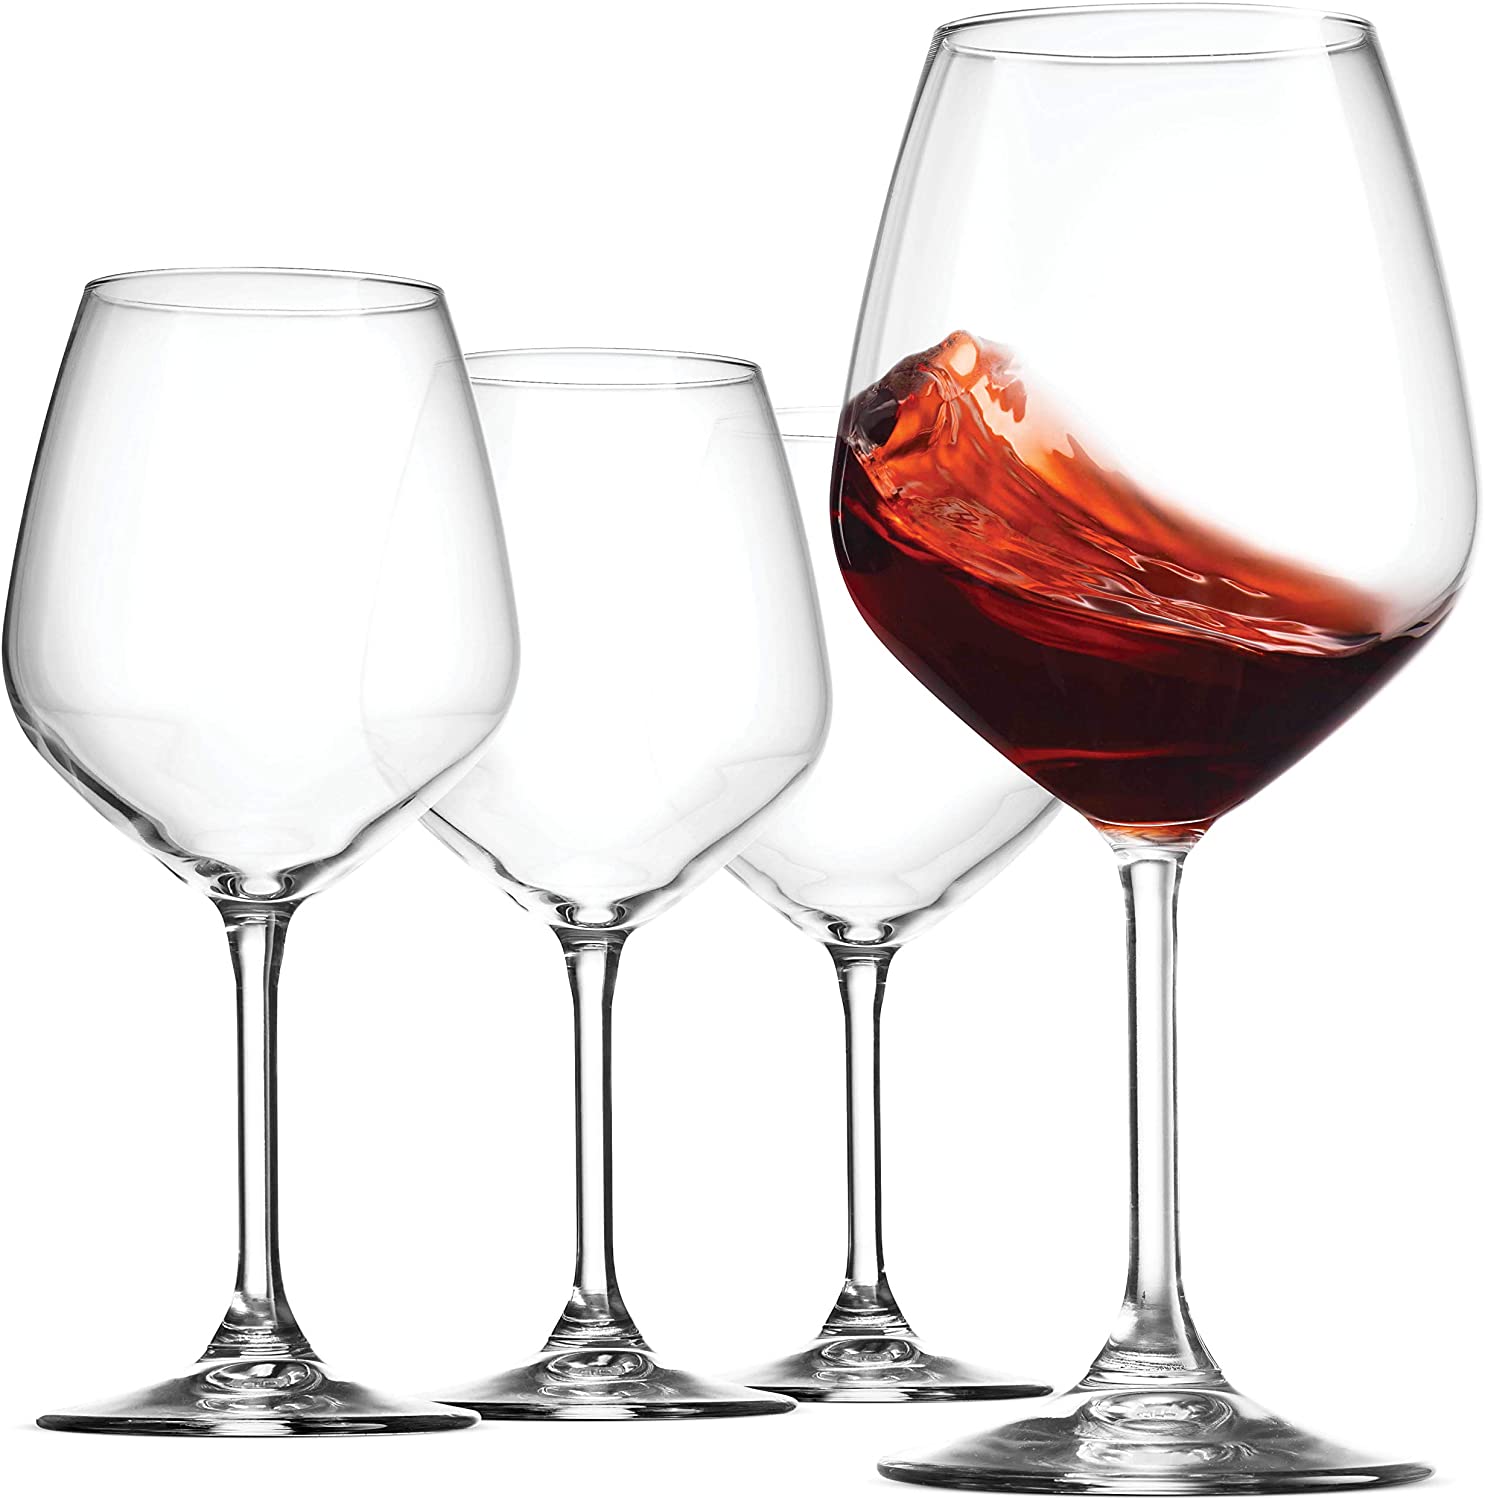 JBHO Reusable Hand-Blown Wine Glasses, Set Of 4